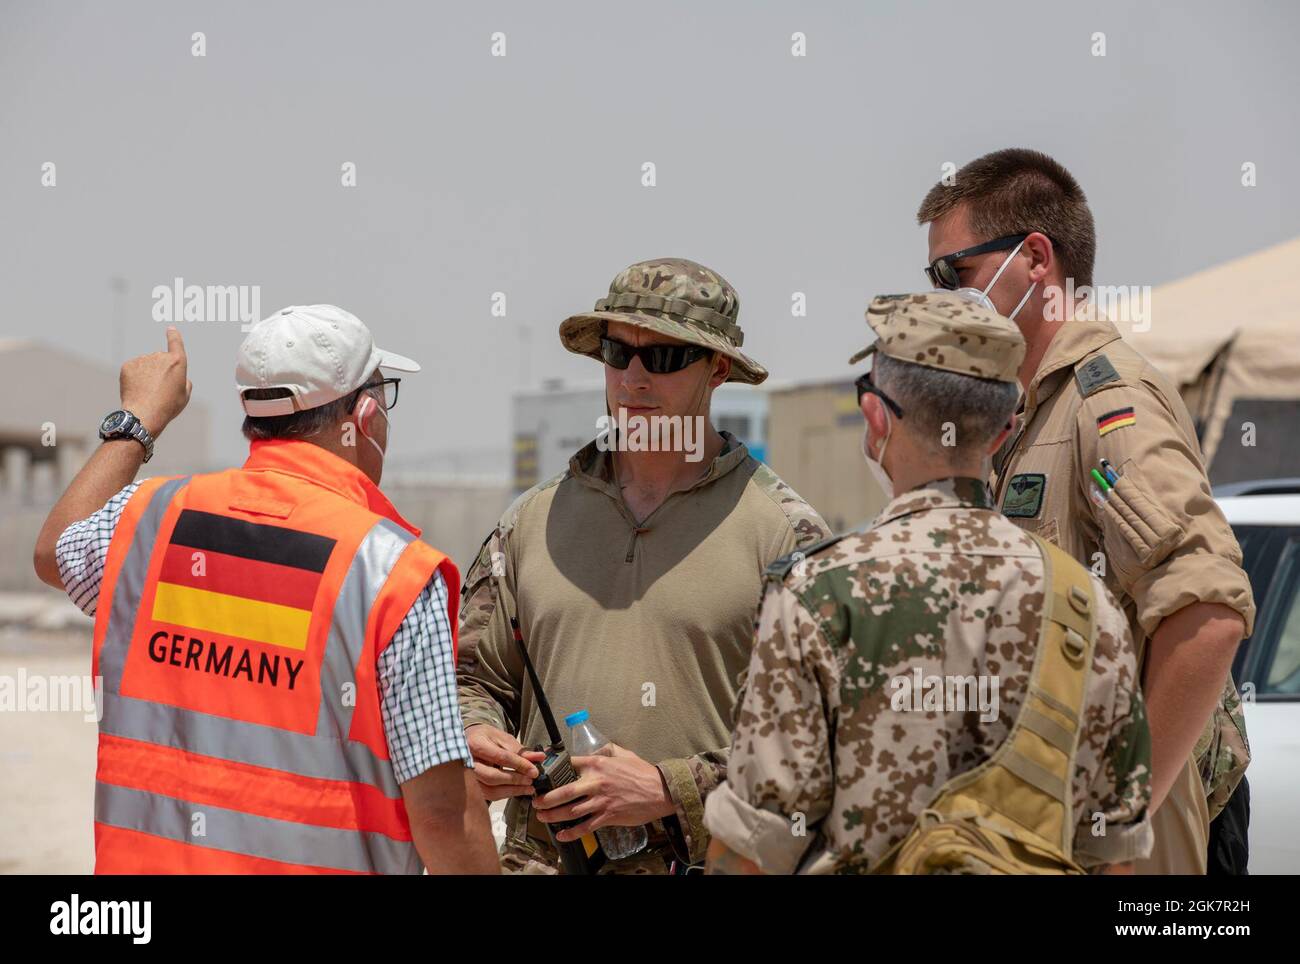 U.S. and German Armed Forces service members coordinate to locate personnel at Al Udeid Air Base, Qatar, Aug. 28, 2021. The U.S. military and coalition forces remains committed with supporting with the evacuation of Special Immigrant Visa applicants and other at-risk individuals from Afghanistan as quickly and safely as possible. Stock Photo